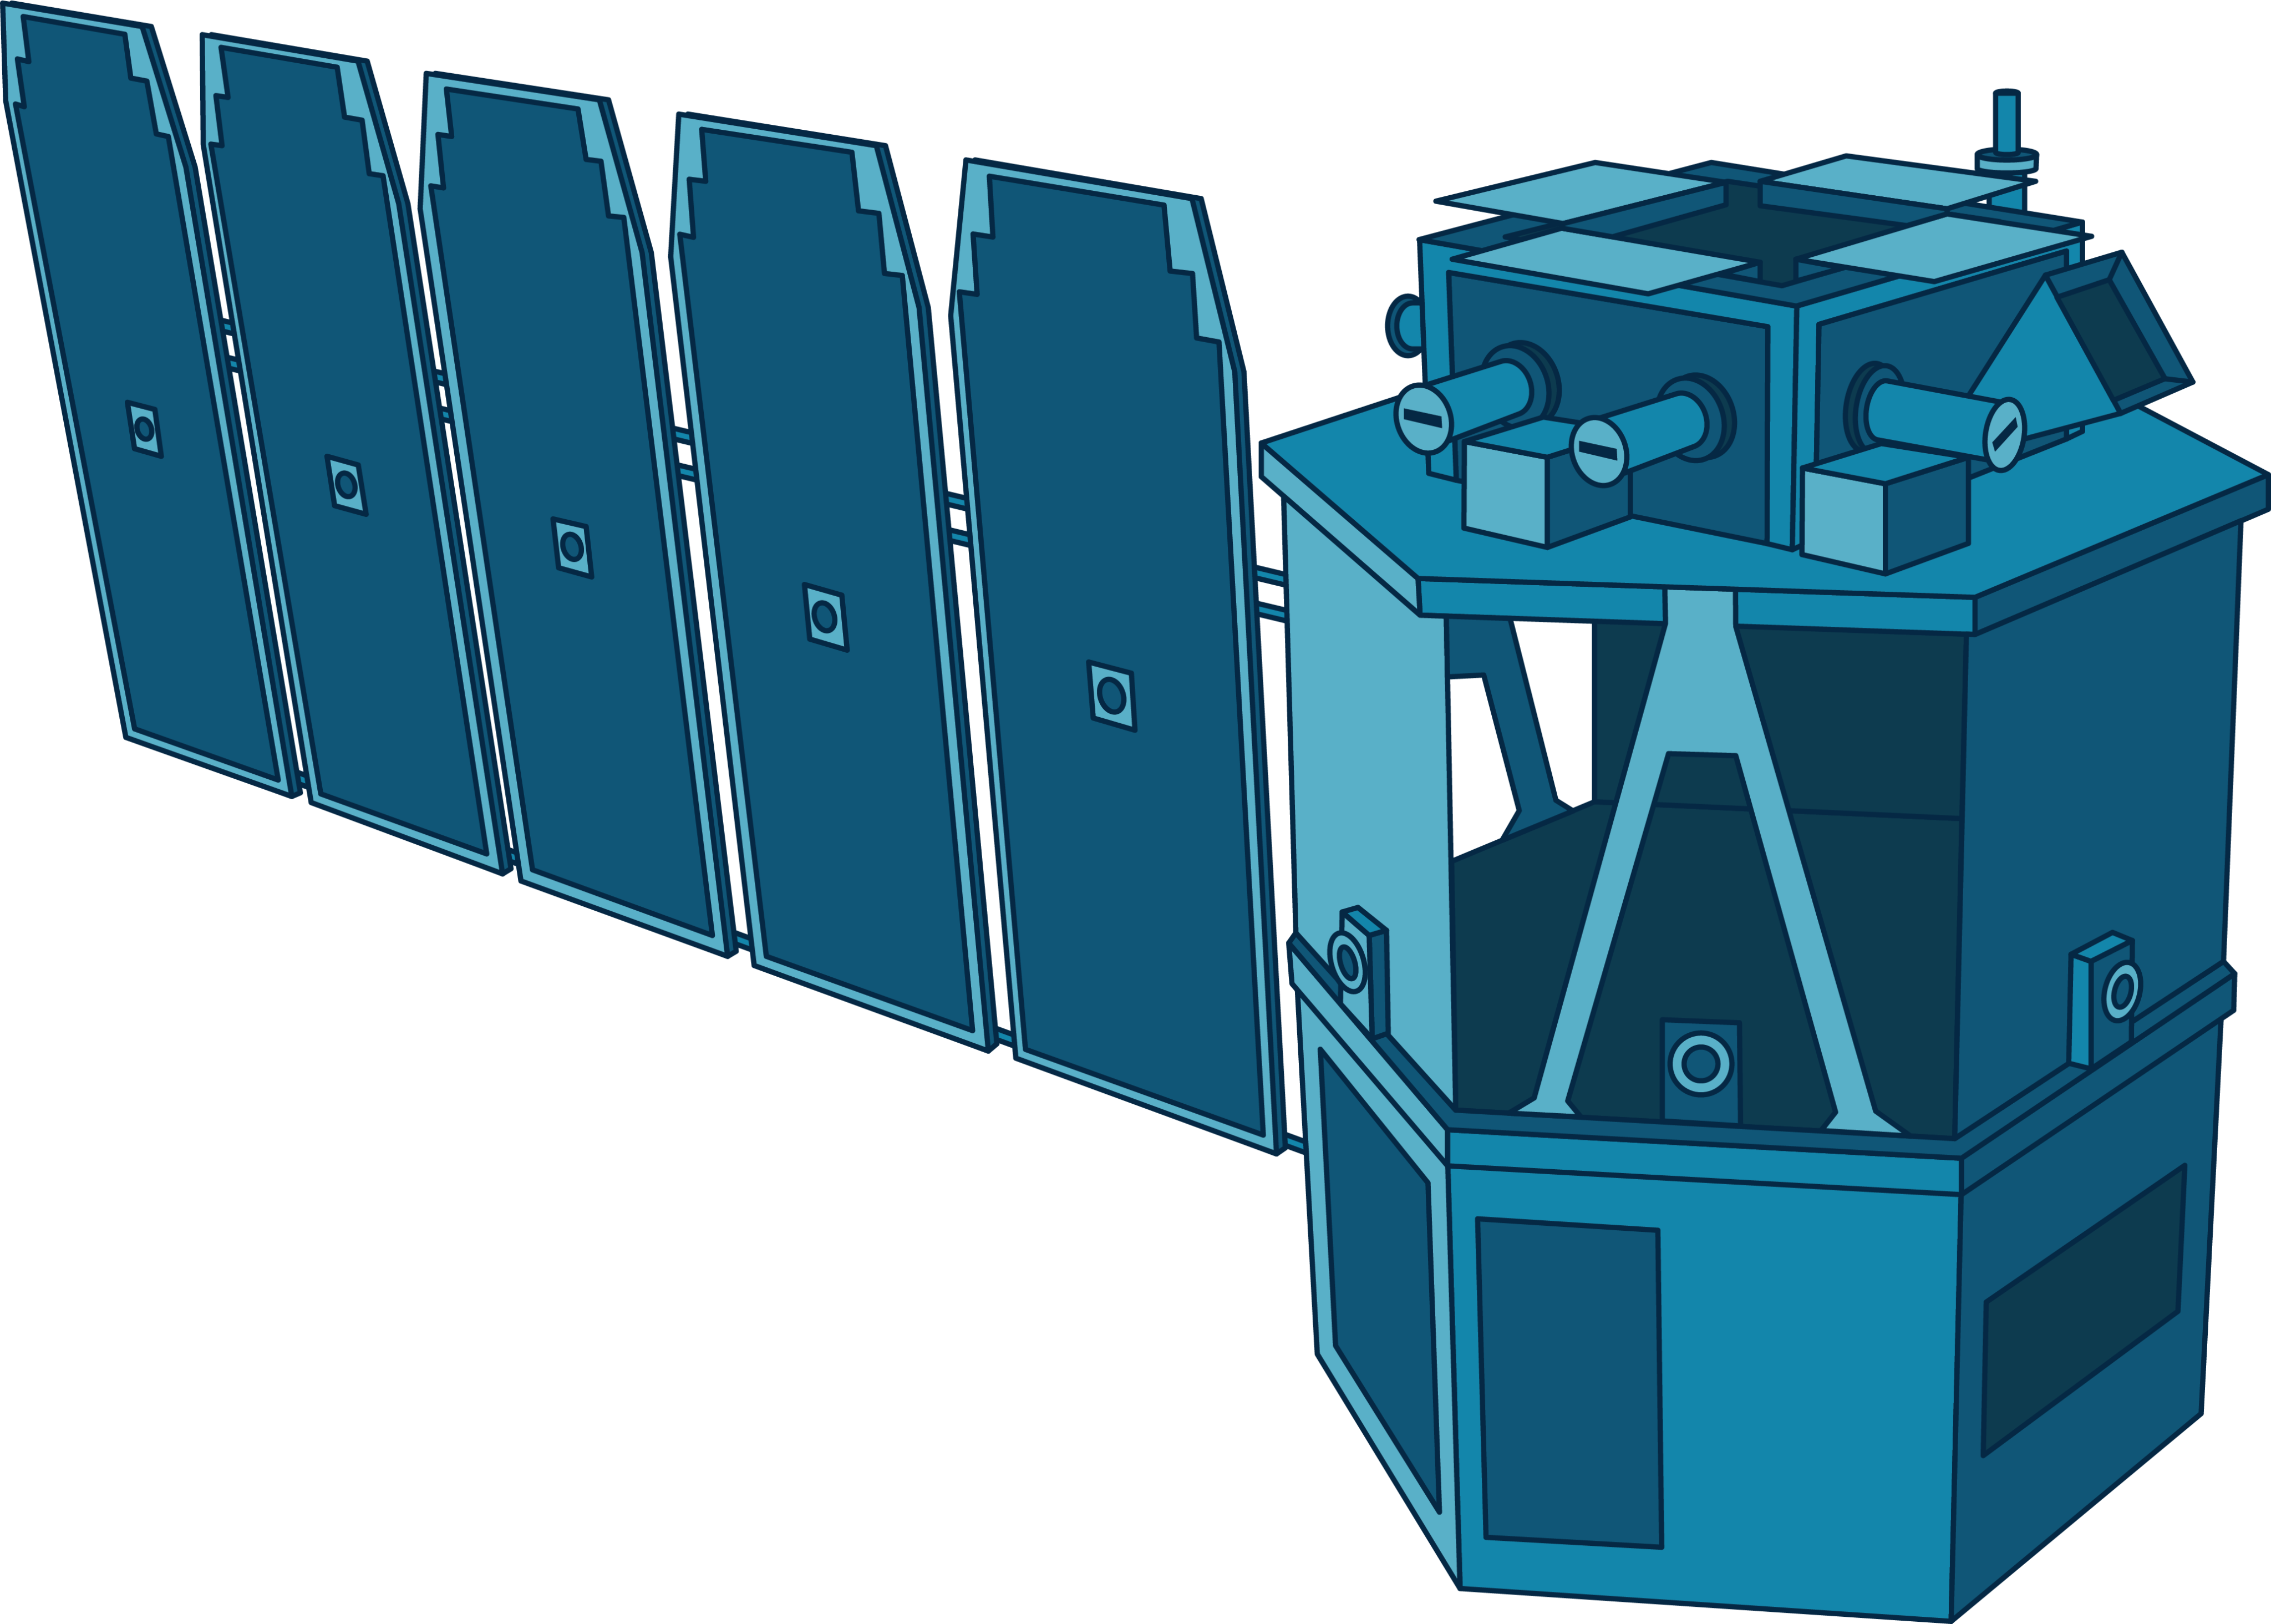 COSI is illustrated in light and dark blues. The spacecraft has a hexagonal body topped with a box with various attachments. One solar panel extends to the left side of the satellite’s body.